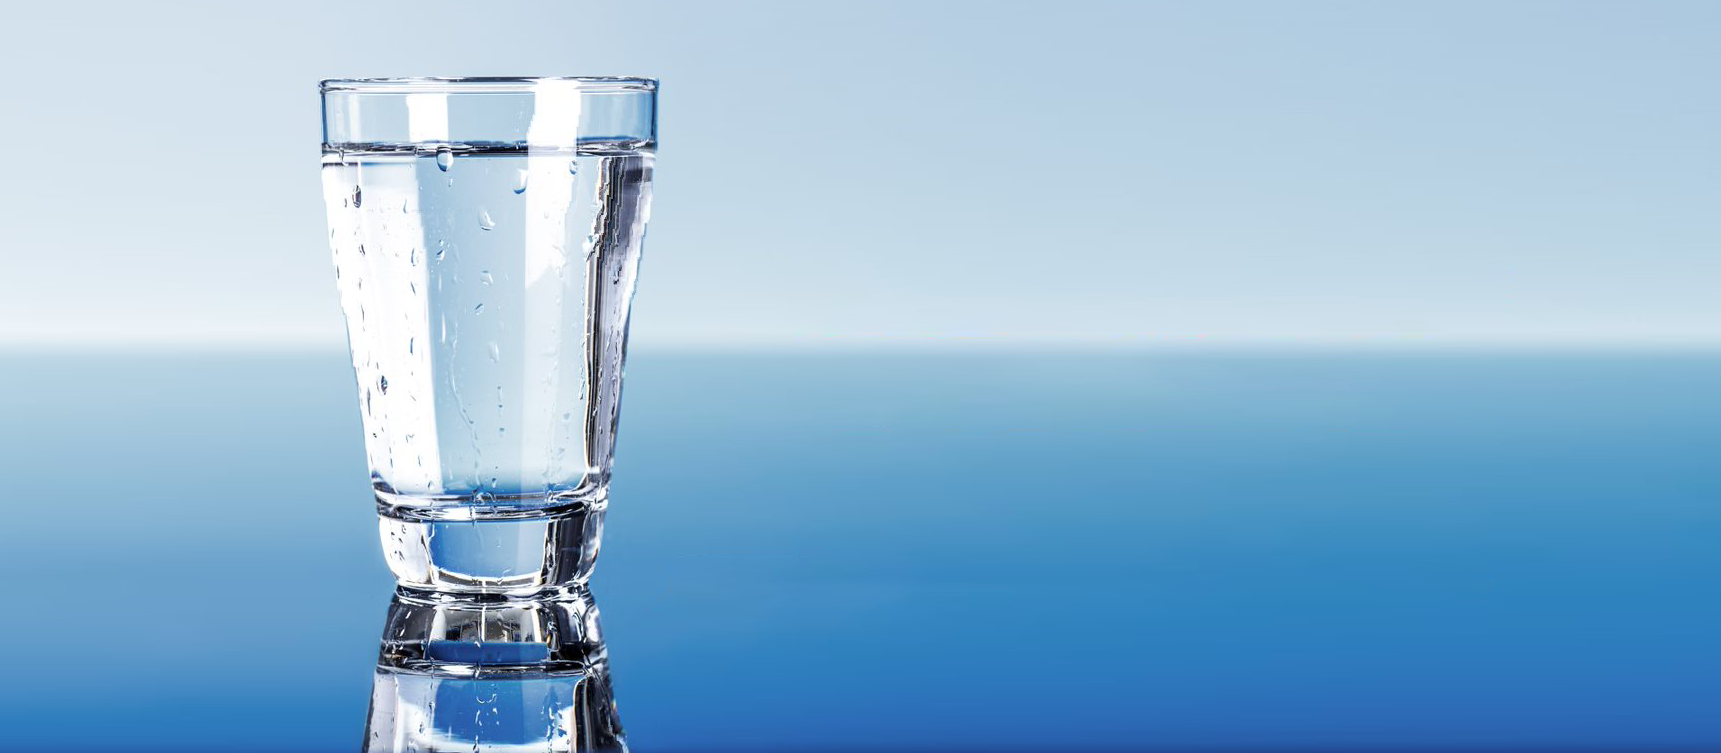 A glass of clear water on a blue gradient background.